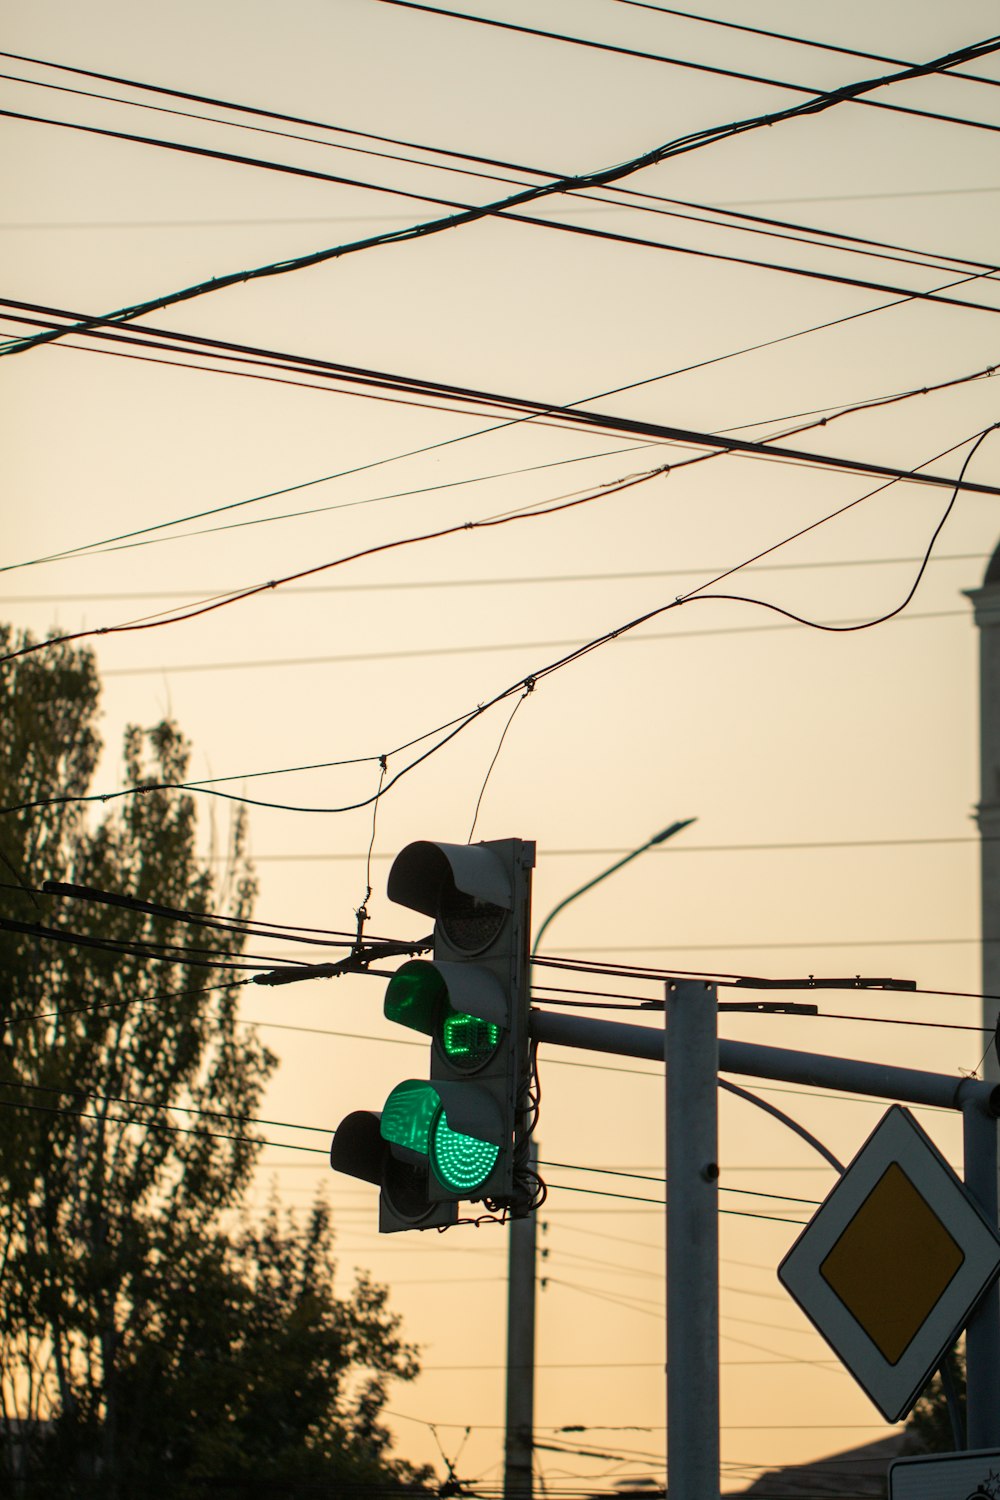 a traffic light hanging over a street next to power lines